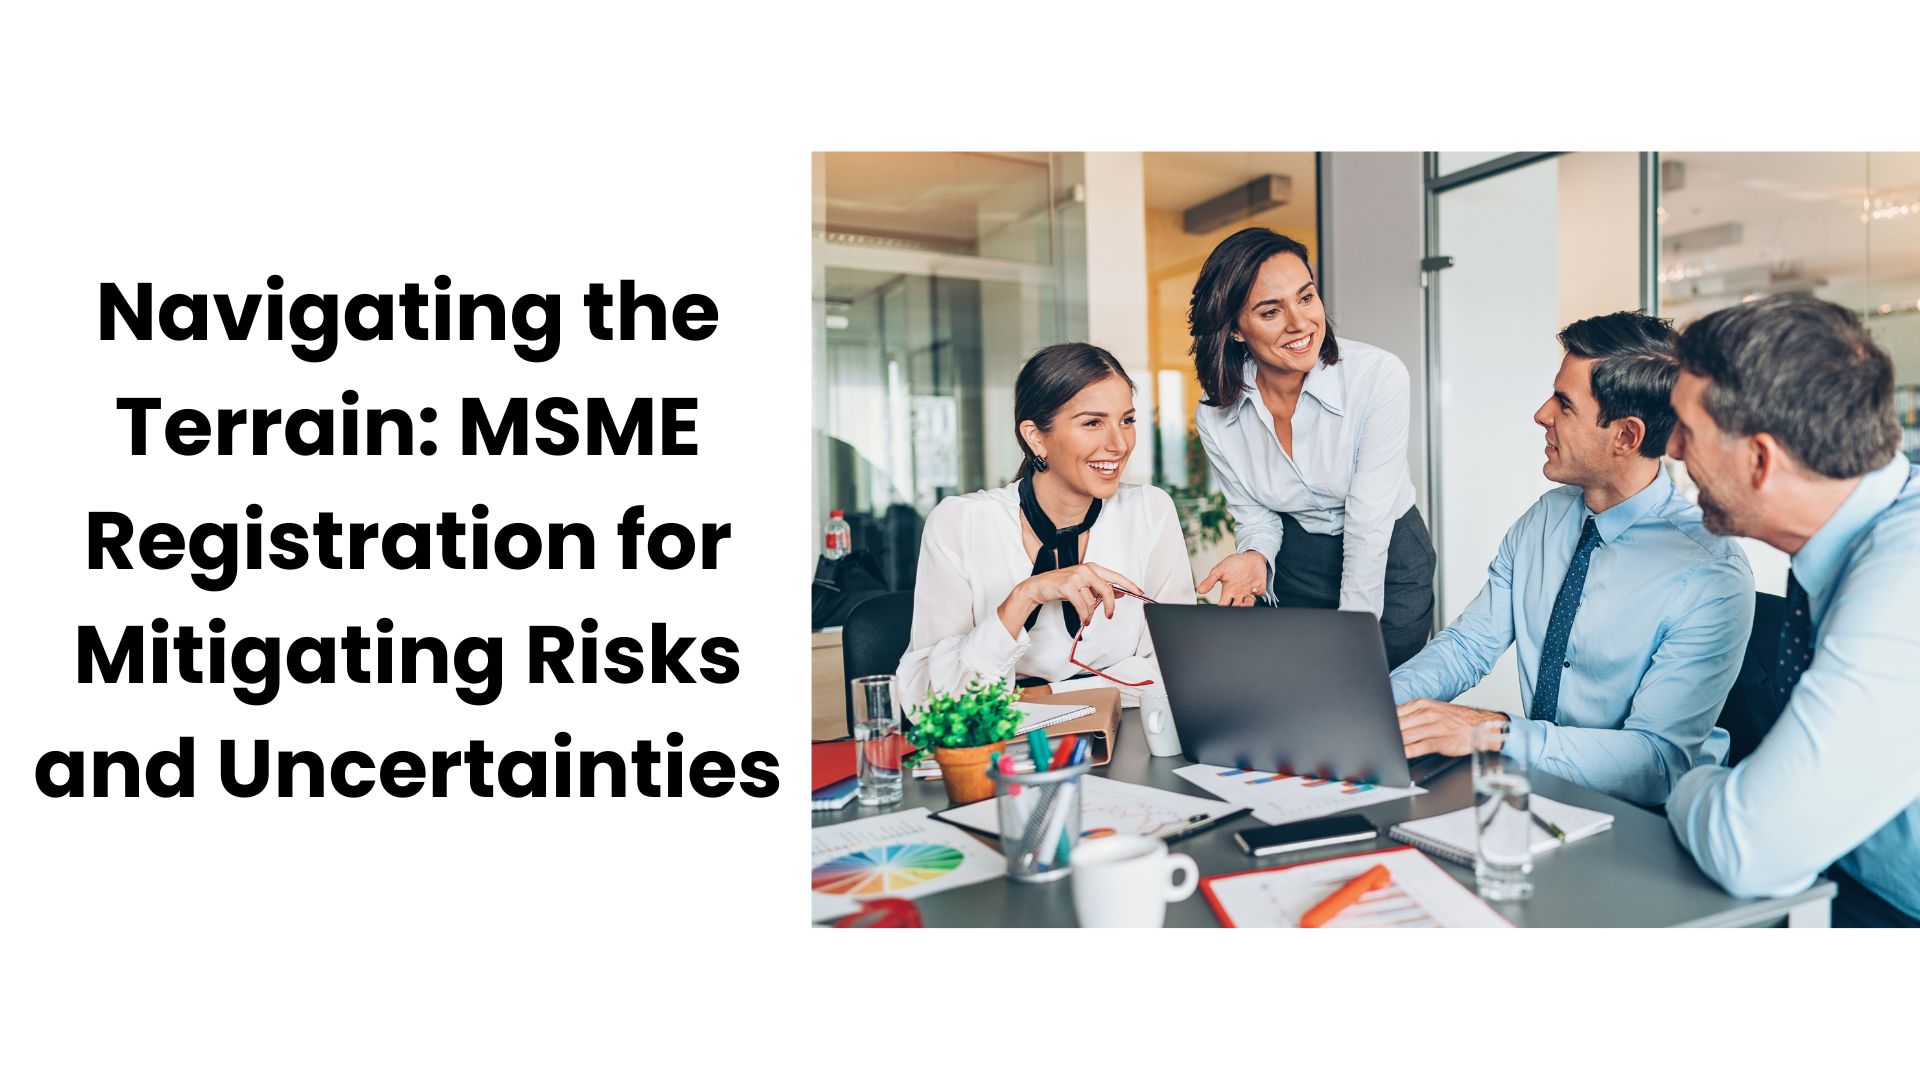 Navigating the Terrain: MSME Registration for Mitigating Risks and Uncertainties